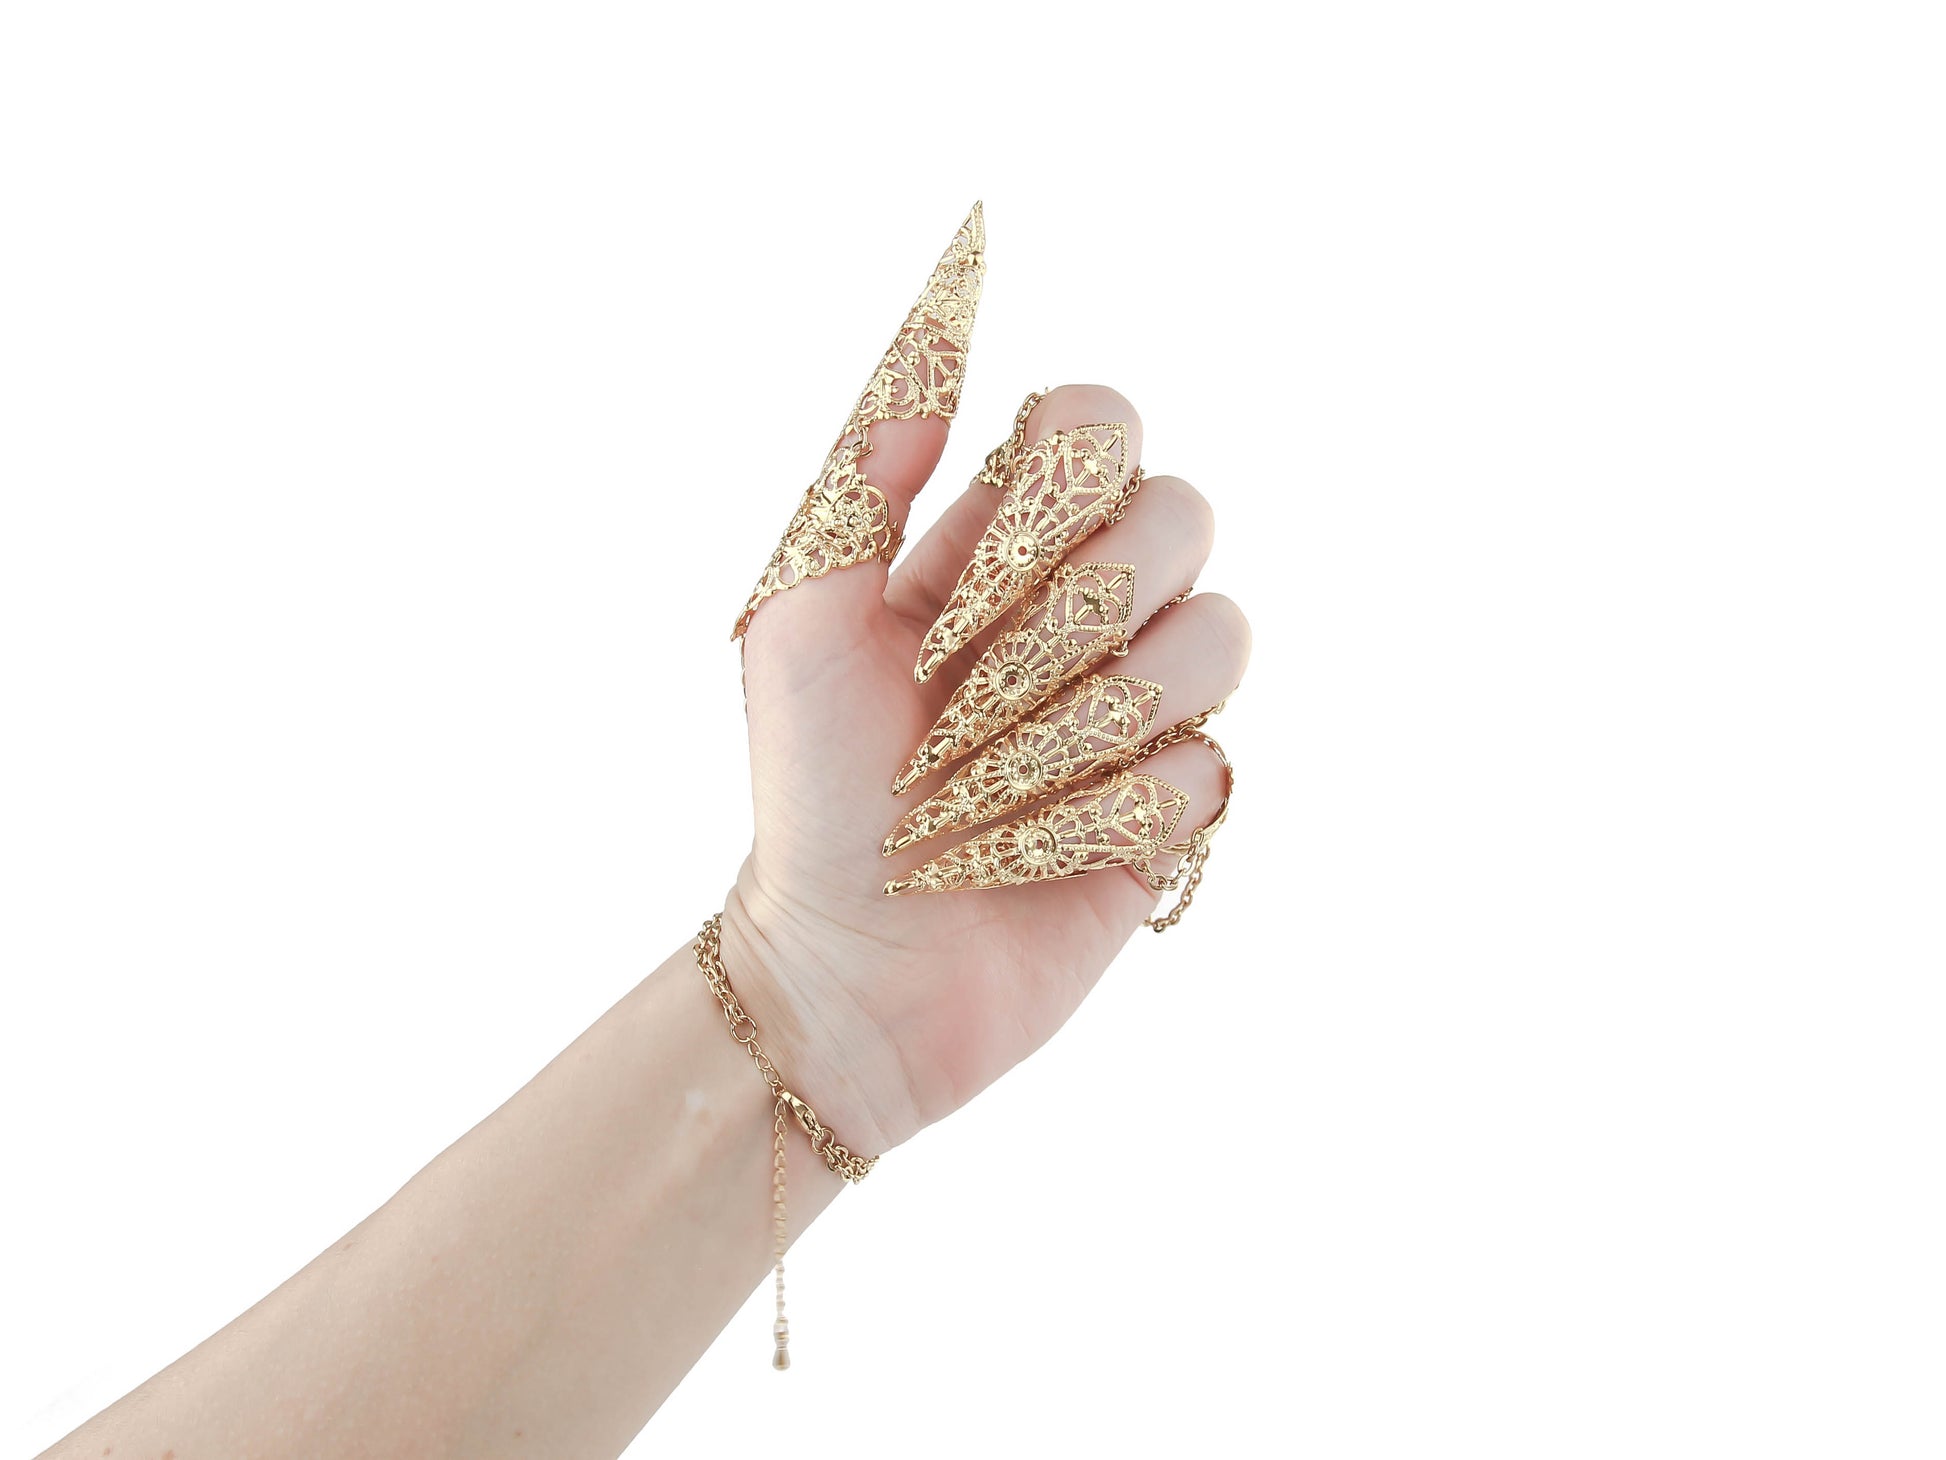 A striking metal glove adorned with gold finger claw rings from Myril Jewels, epitomizing dark, avant-garde style. Perfect for gothic and alternative fashion enthusiasts, ideal for making a bold statement at Halloween events, rave parties, or as an edgy everyday accessory.